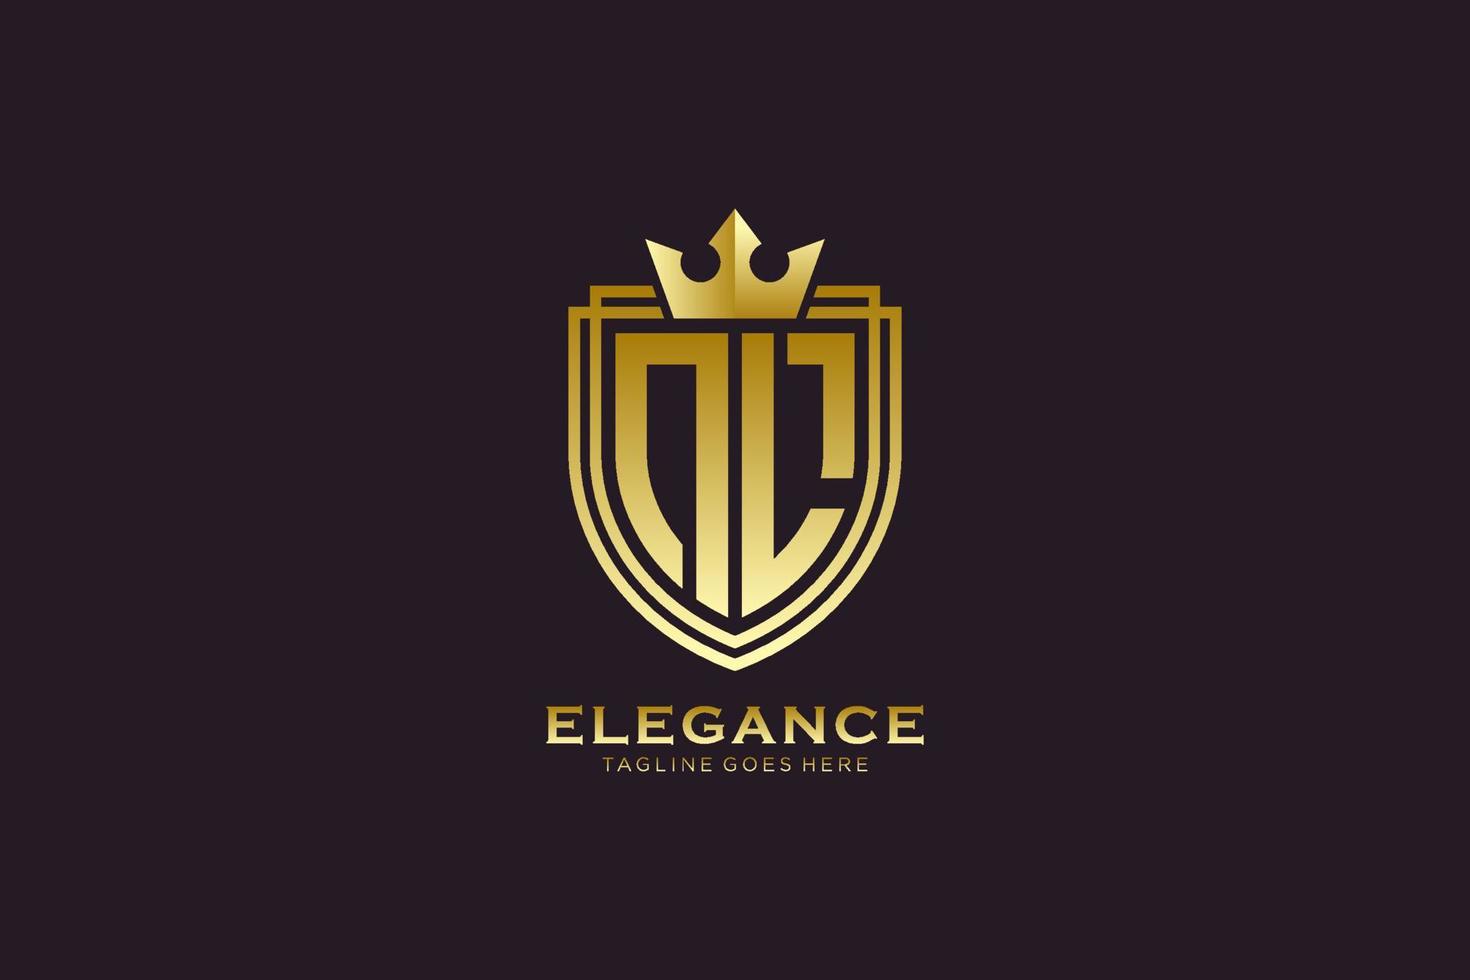 initial NL elegant luxury monogram logo or badge template with scrolls and royal crown - perfect for luxurious branding projects vector